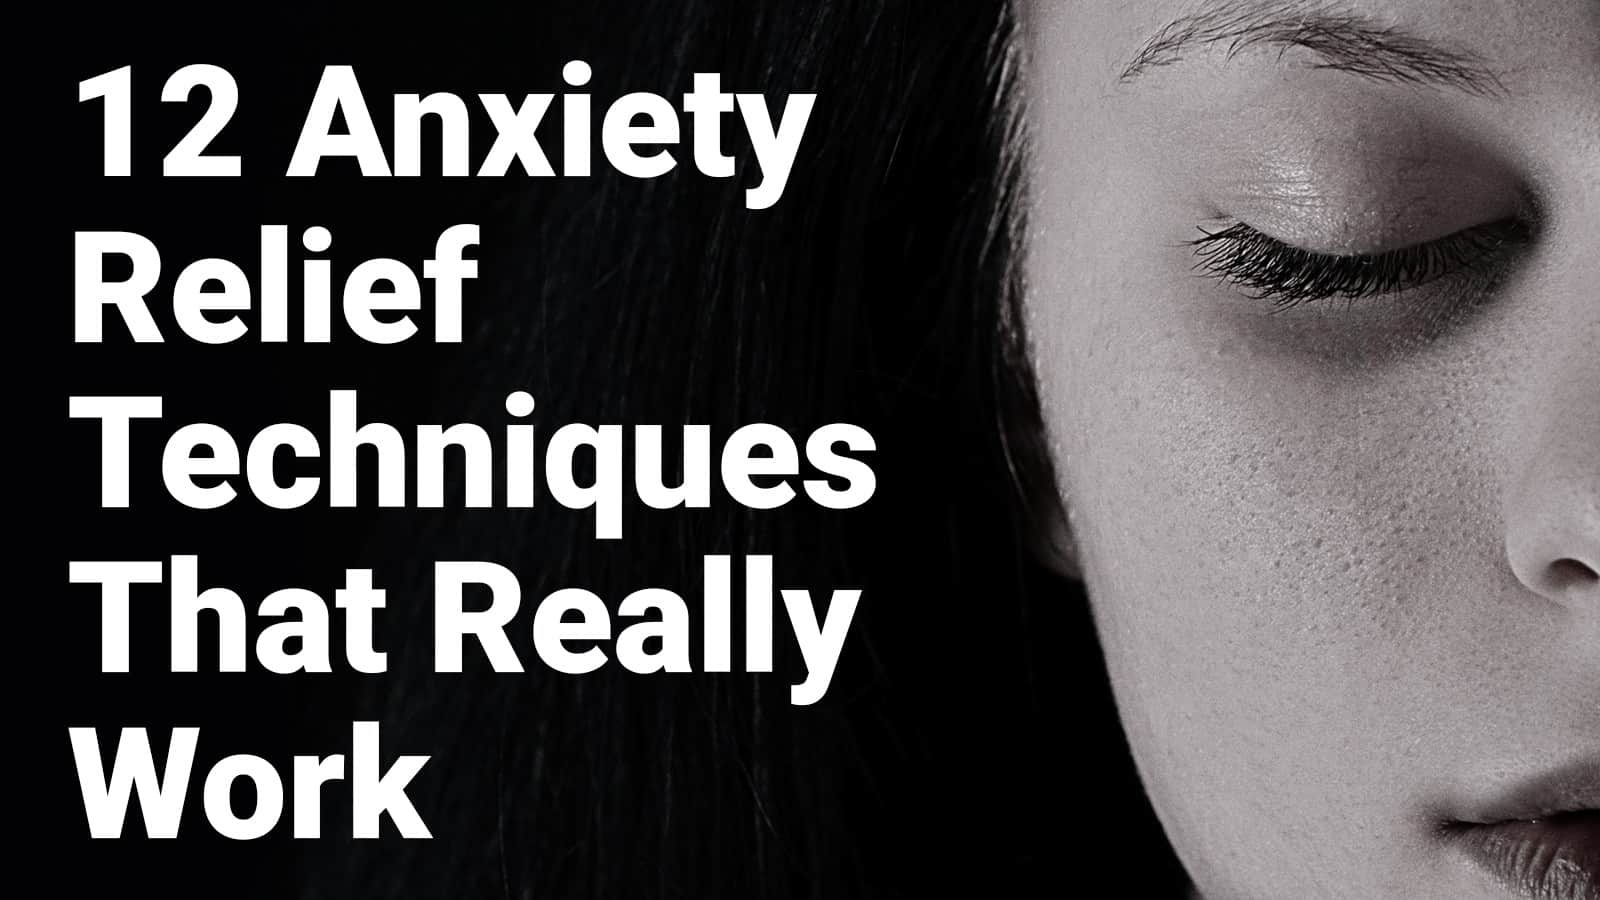 12 Anxiety Relief Techniques That Really Work